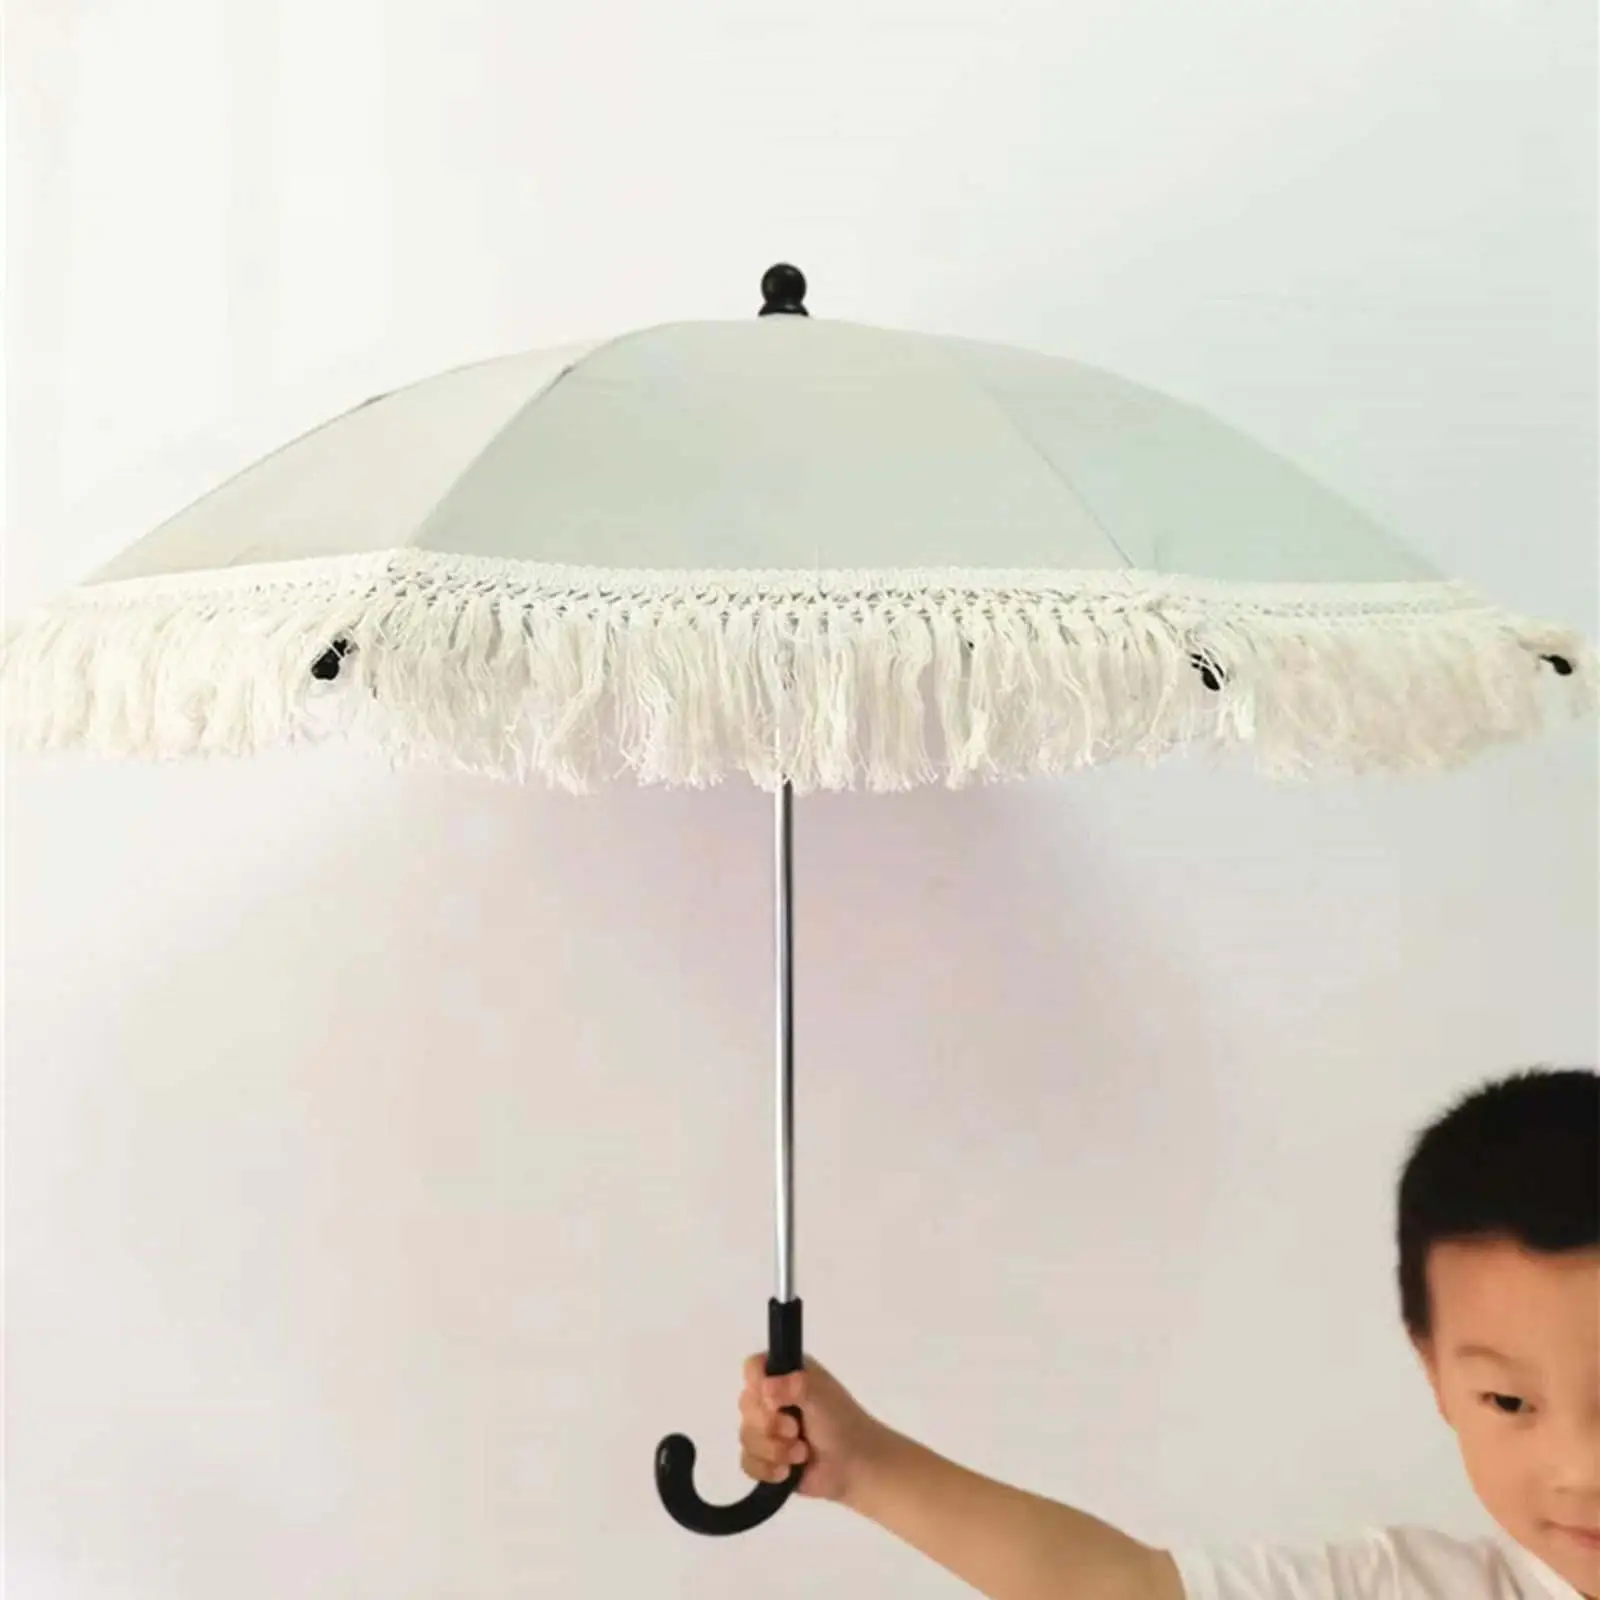 Kids Umbrella J Hook Handle Sun Protection Windproof Baby Parasol for Outing